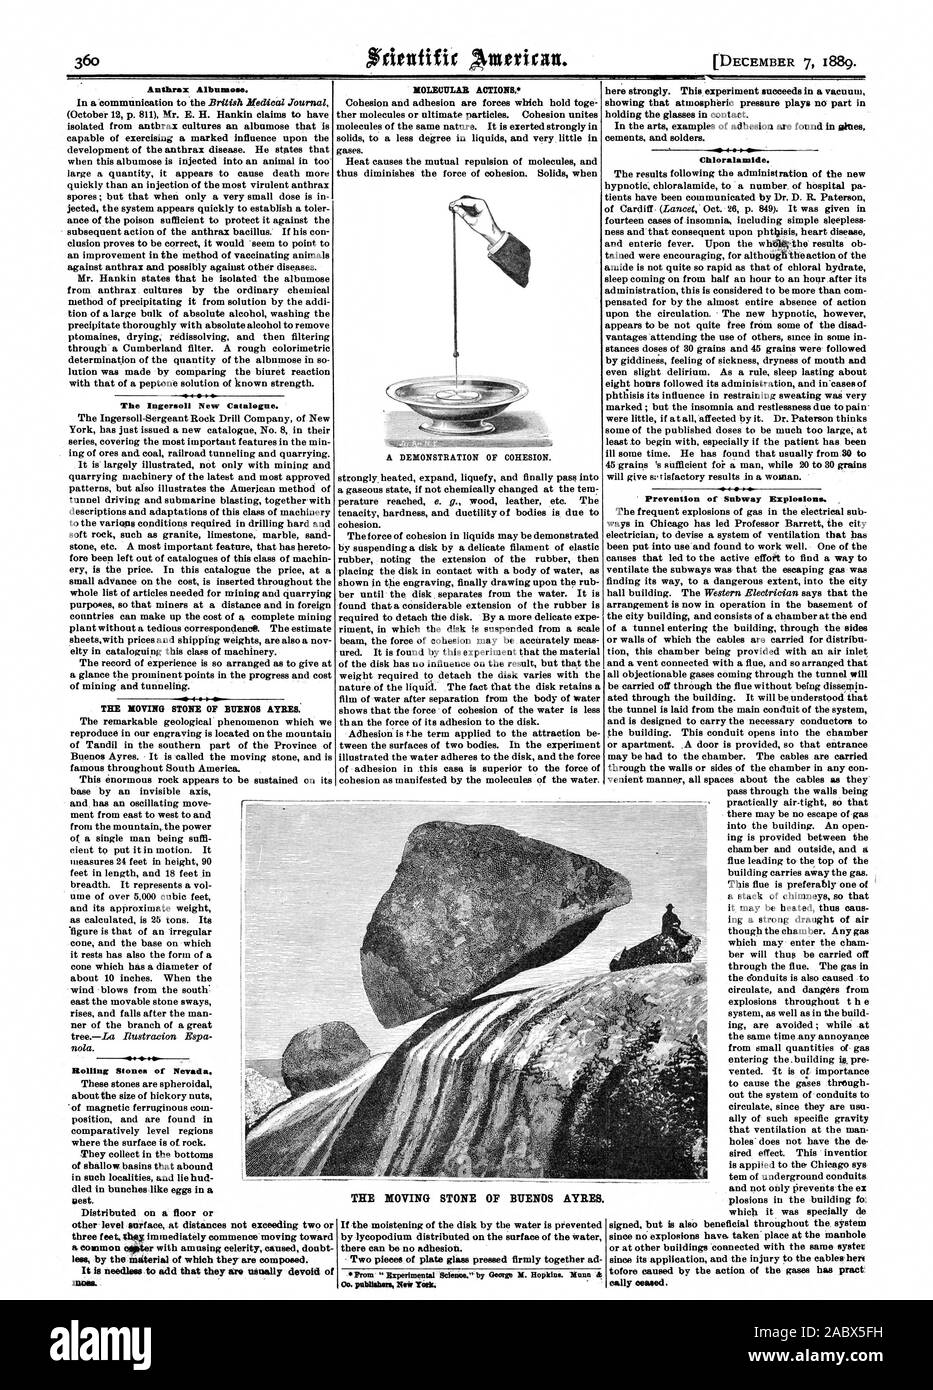 Anthrax Albums's. The Ingersoll New Catalogue. THE ROVING STONE OF BUENOS AYRES: Rolling Stones of Nevada. It is needless to add that they are tumidly devoid of moss. MOLECULAR ACTIONS. THE MOVING STONE OF BUENOS AYRES. Chloralawide. Prevention of Subway Explosions. cally ceased., scientific american, 1889-12-07 Stock Photo